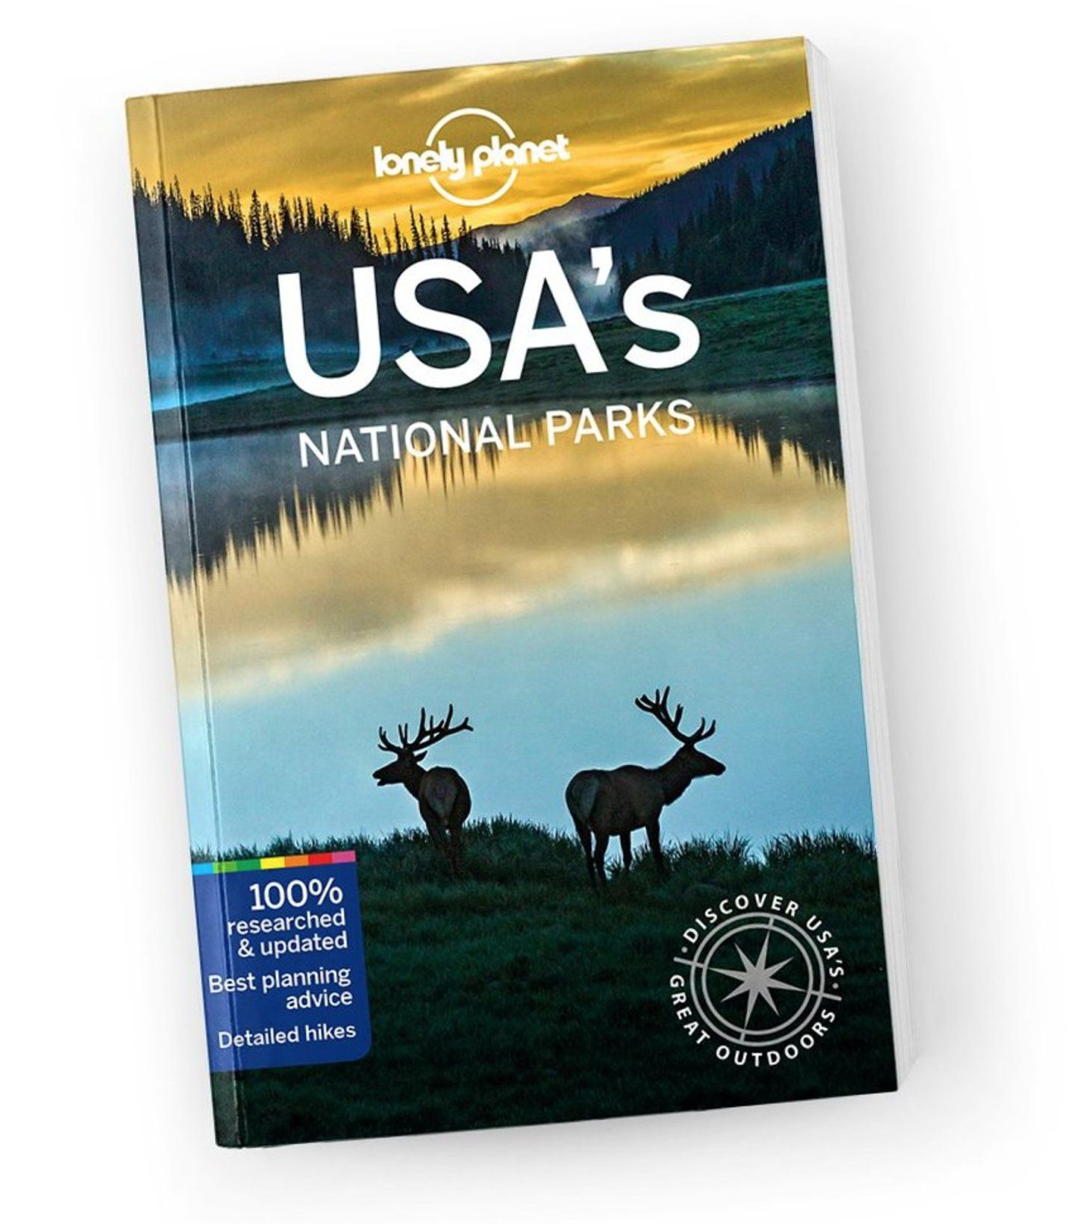 Lonely Planet's Guide to the USA's National Parks